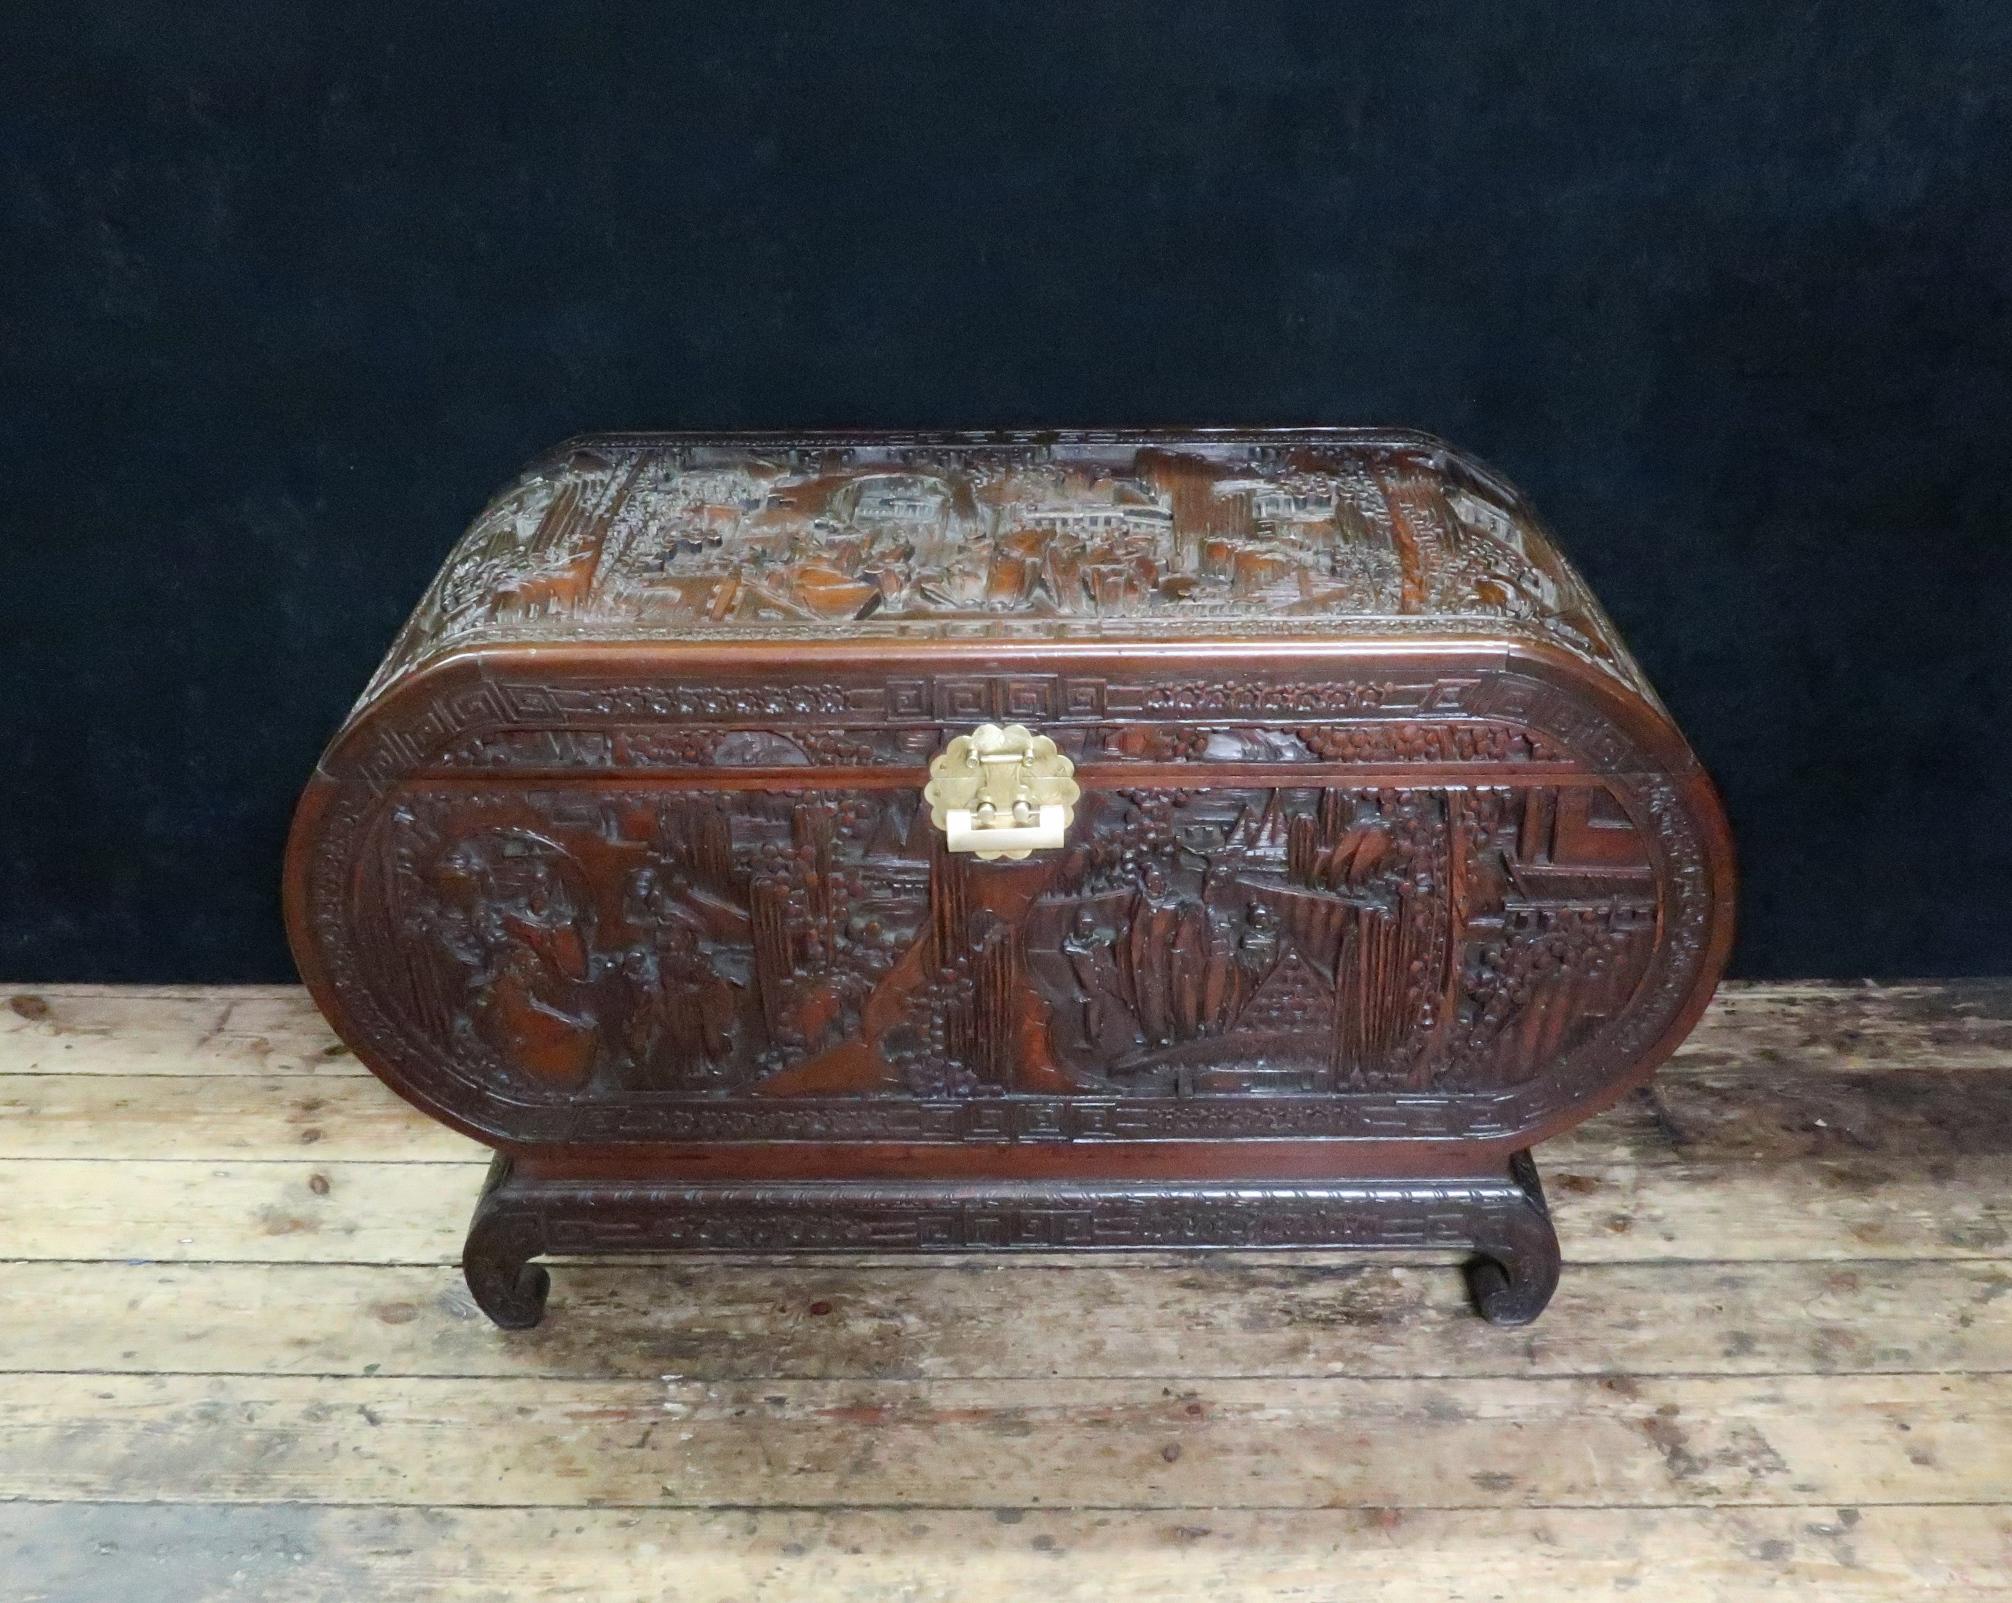 A superb oval shaped oriental freestanding teak chest profusely and deeply carved with scenes of trees, flowers, mountains, people and pagodas within a floral border with kang table style base on scrolling legs. The chest retains its original